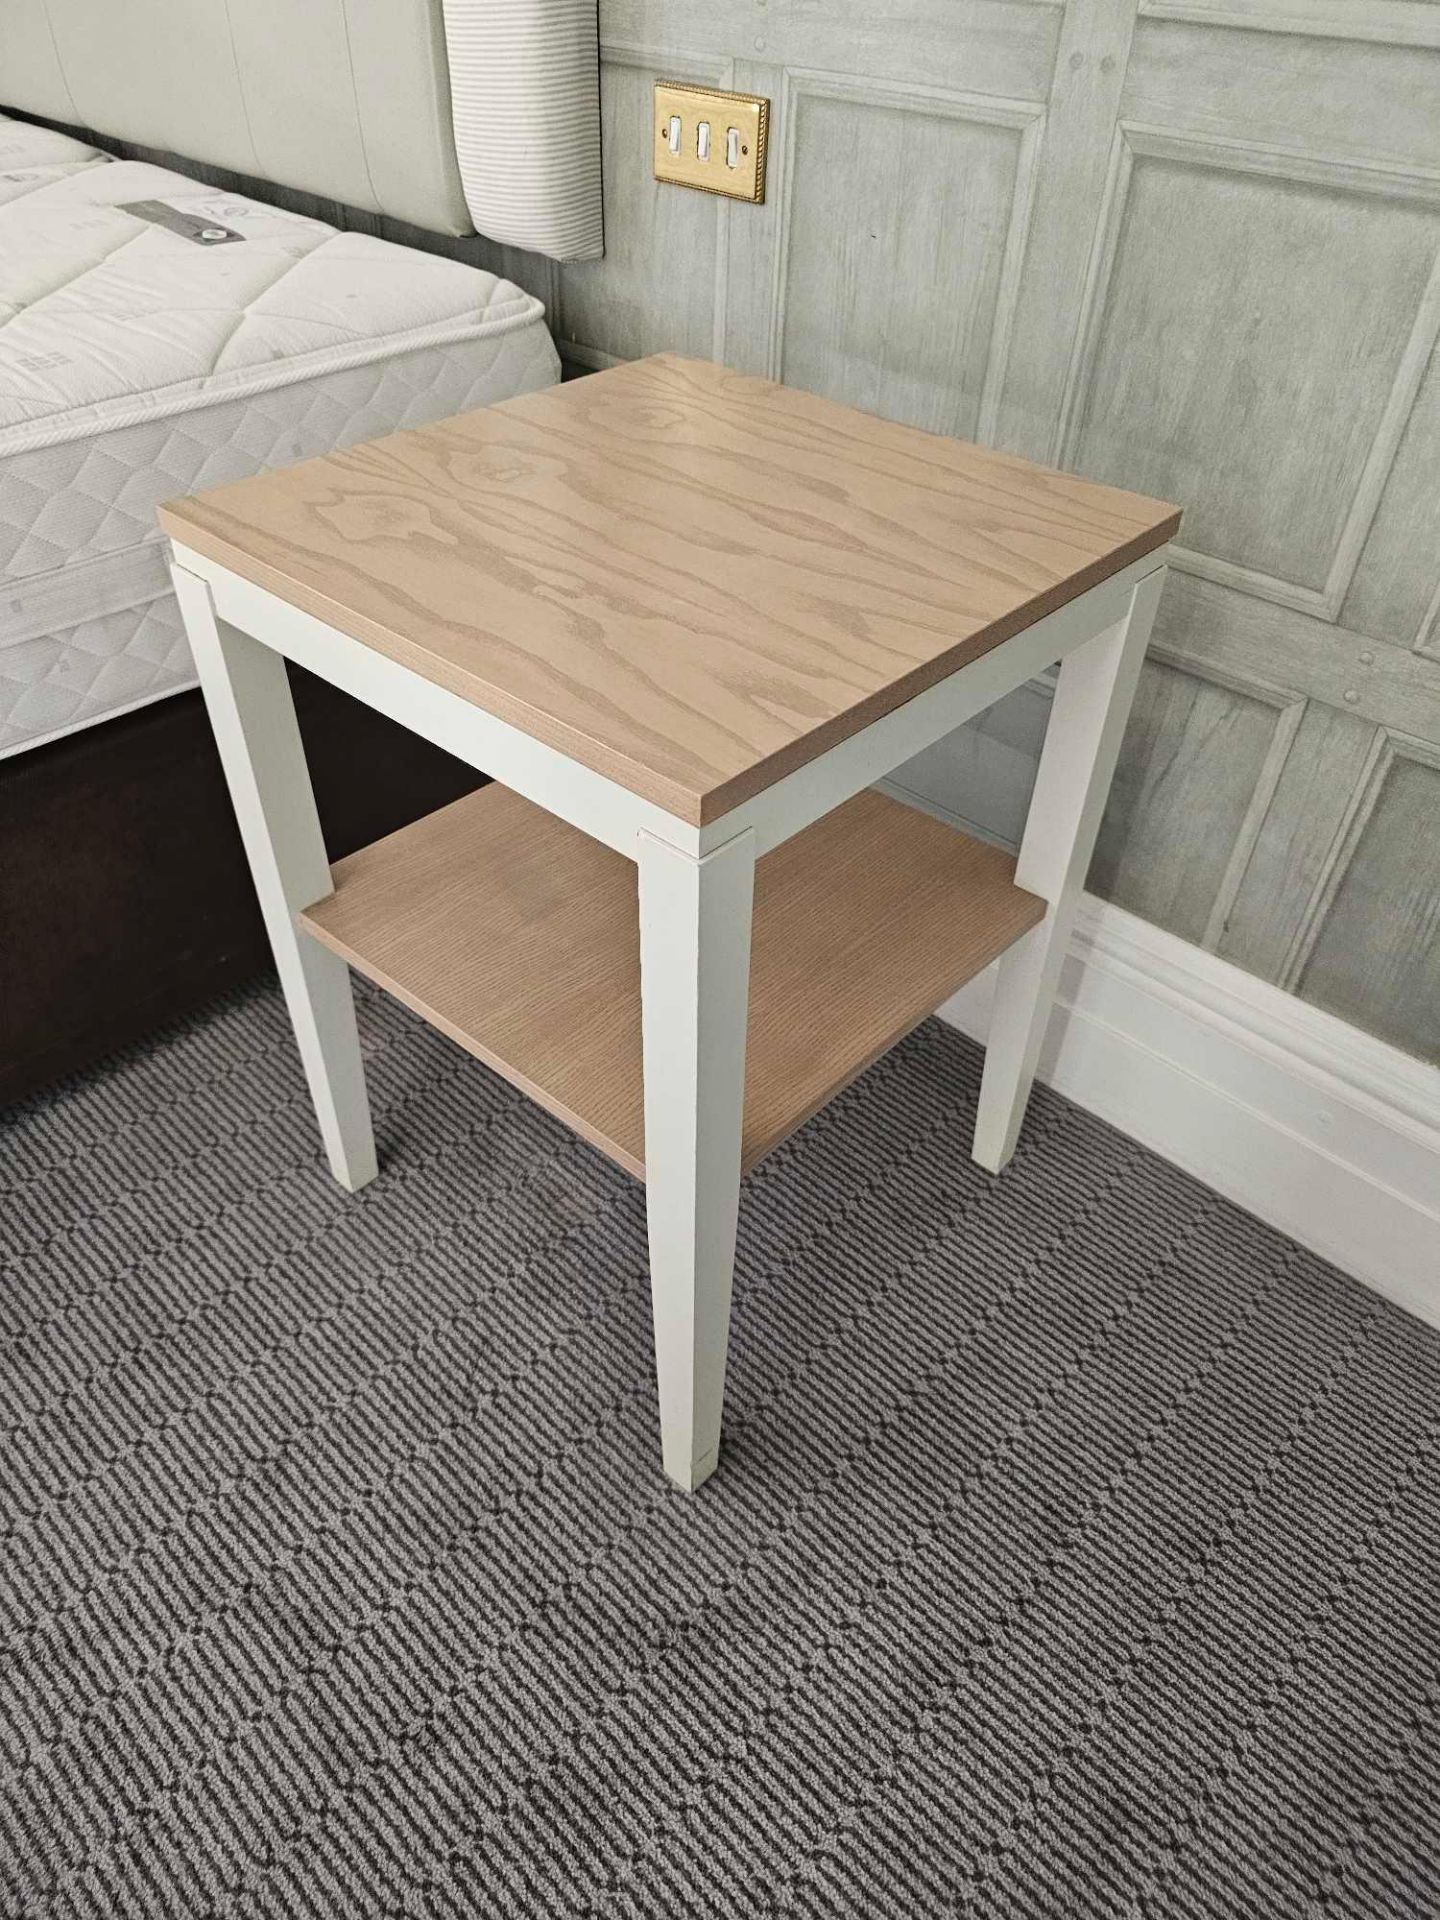 A Pair Of Side Tables A Stylish And Modern Gardenia White Painted Side Table With Undershelf, The - Image 2 of 3